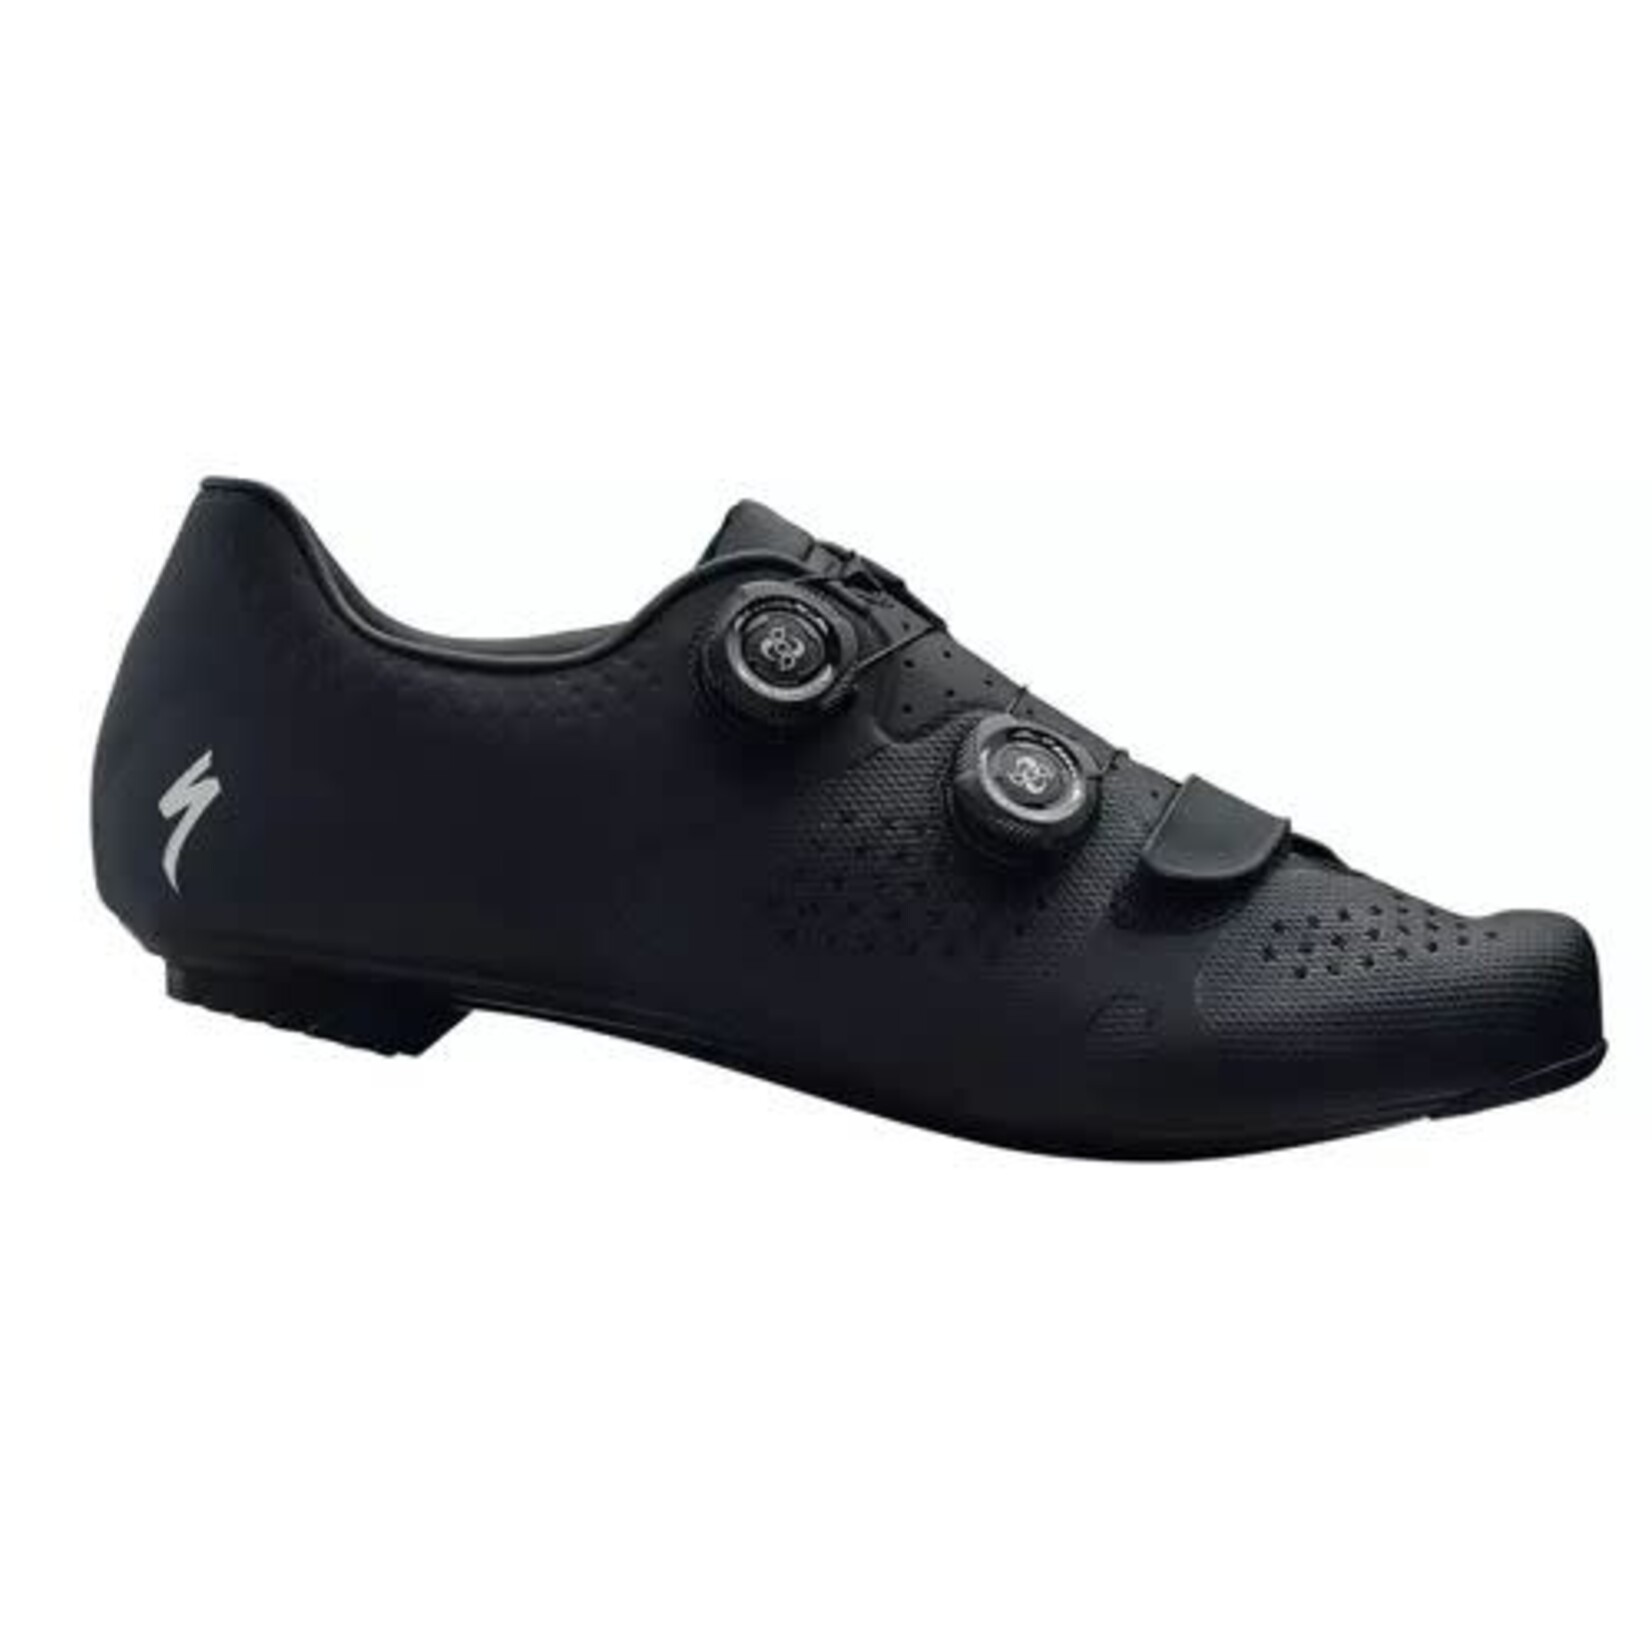 Specialized TORCH 3.0 RD SHOE BLK 41